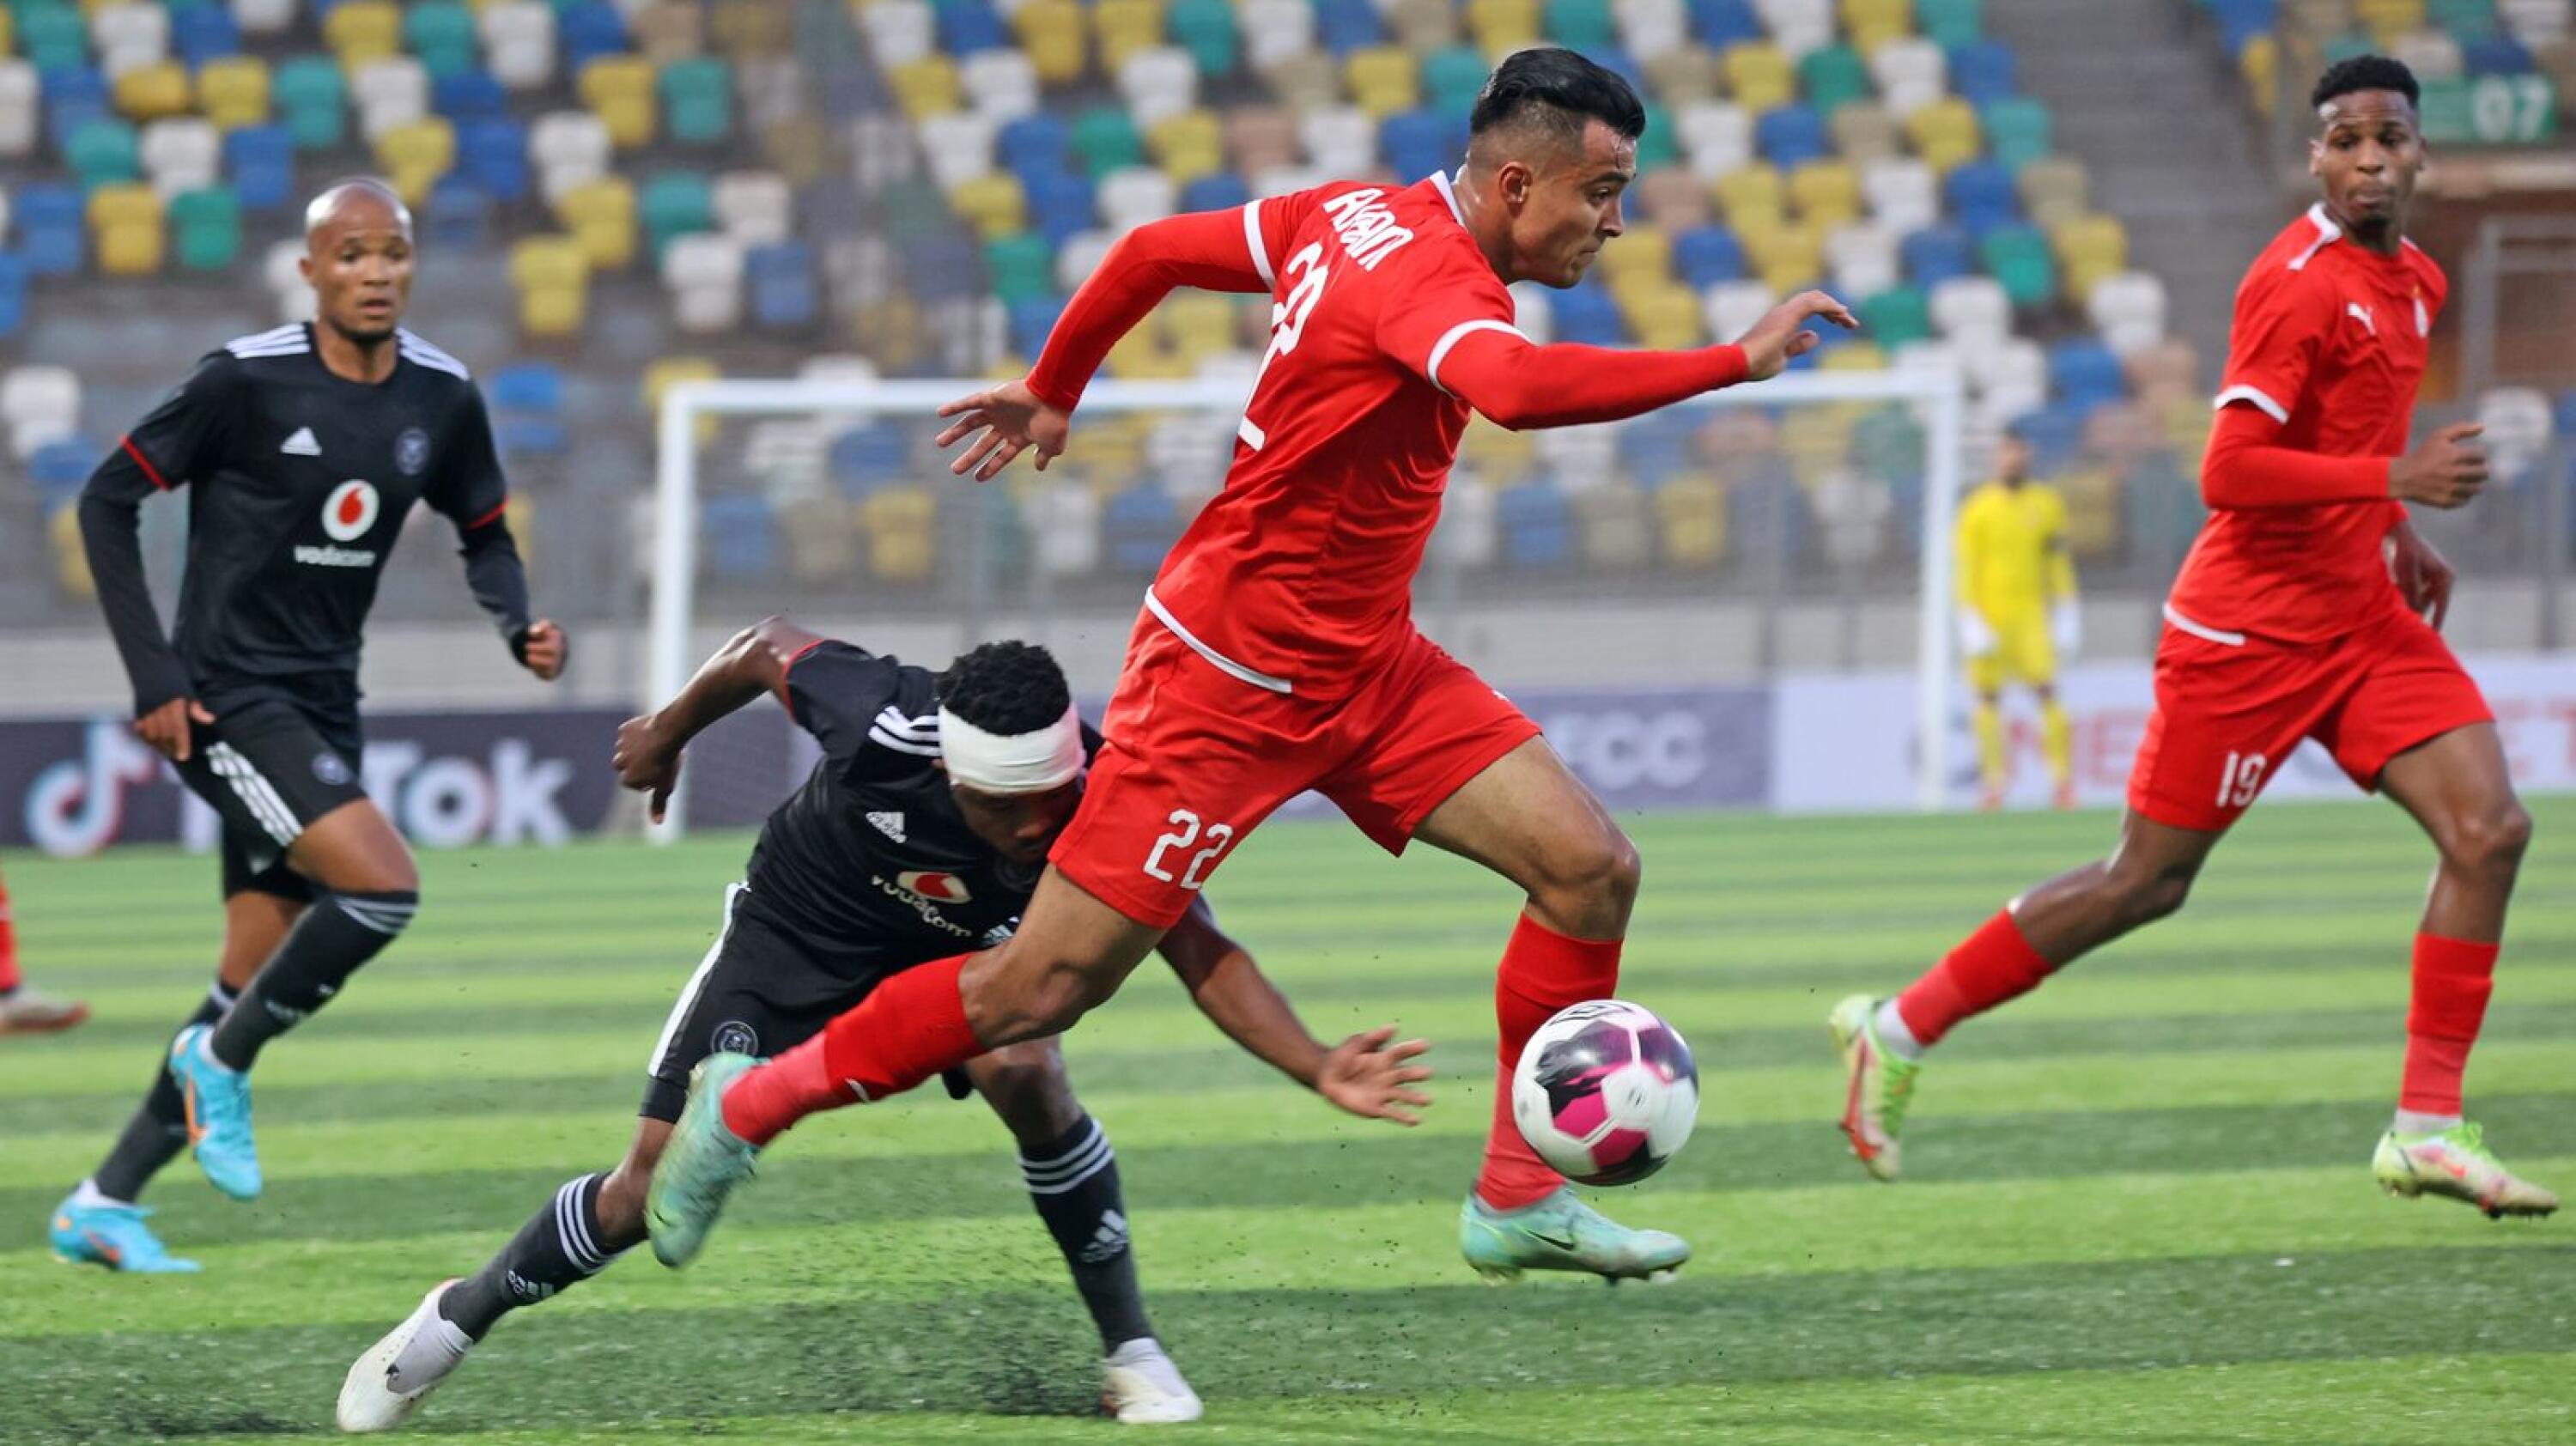 Ahmed Al Haram of Al Ittihad is challenged by Paseka Mako of Orlando Pirates during their CAF Confederation Cup game at Martyrs of February Stadium in Benghazi, Libya on Sunday